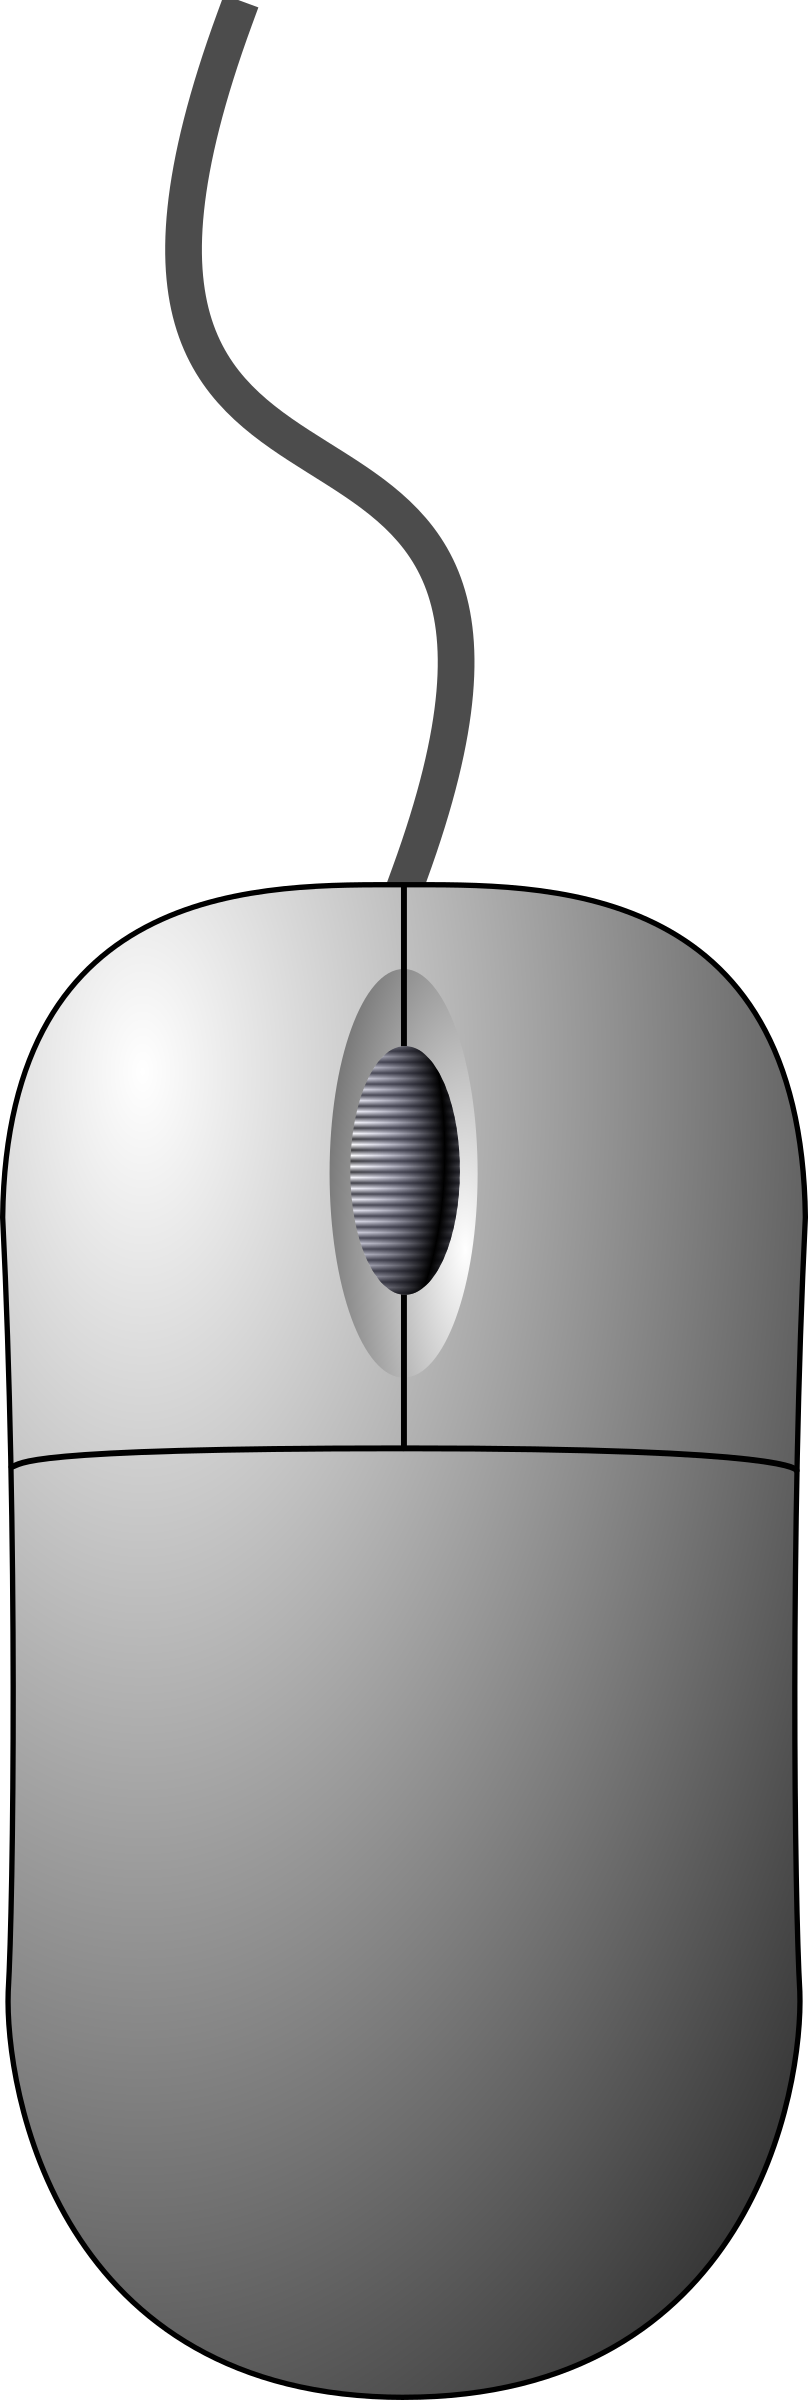 White clipart computer mouse. Top down view big